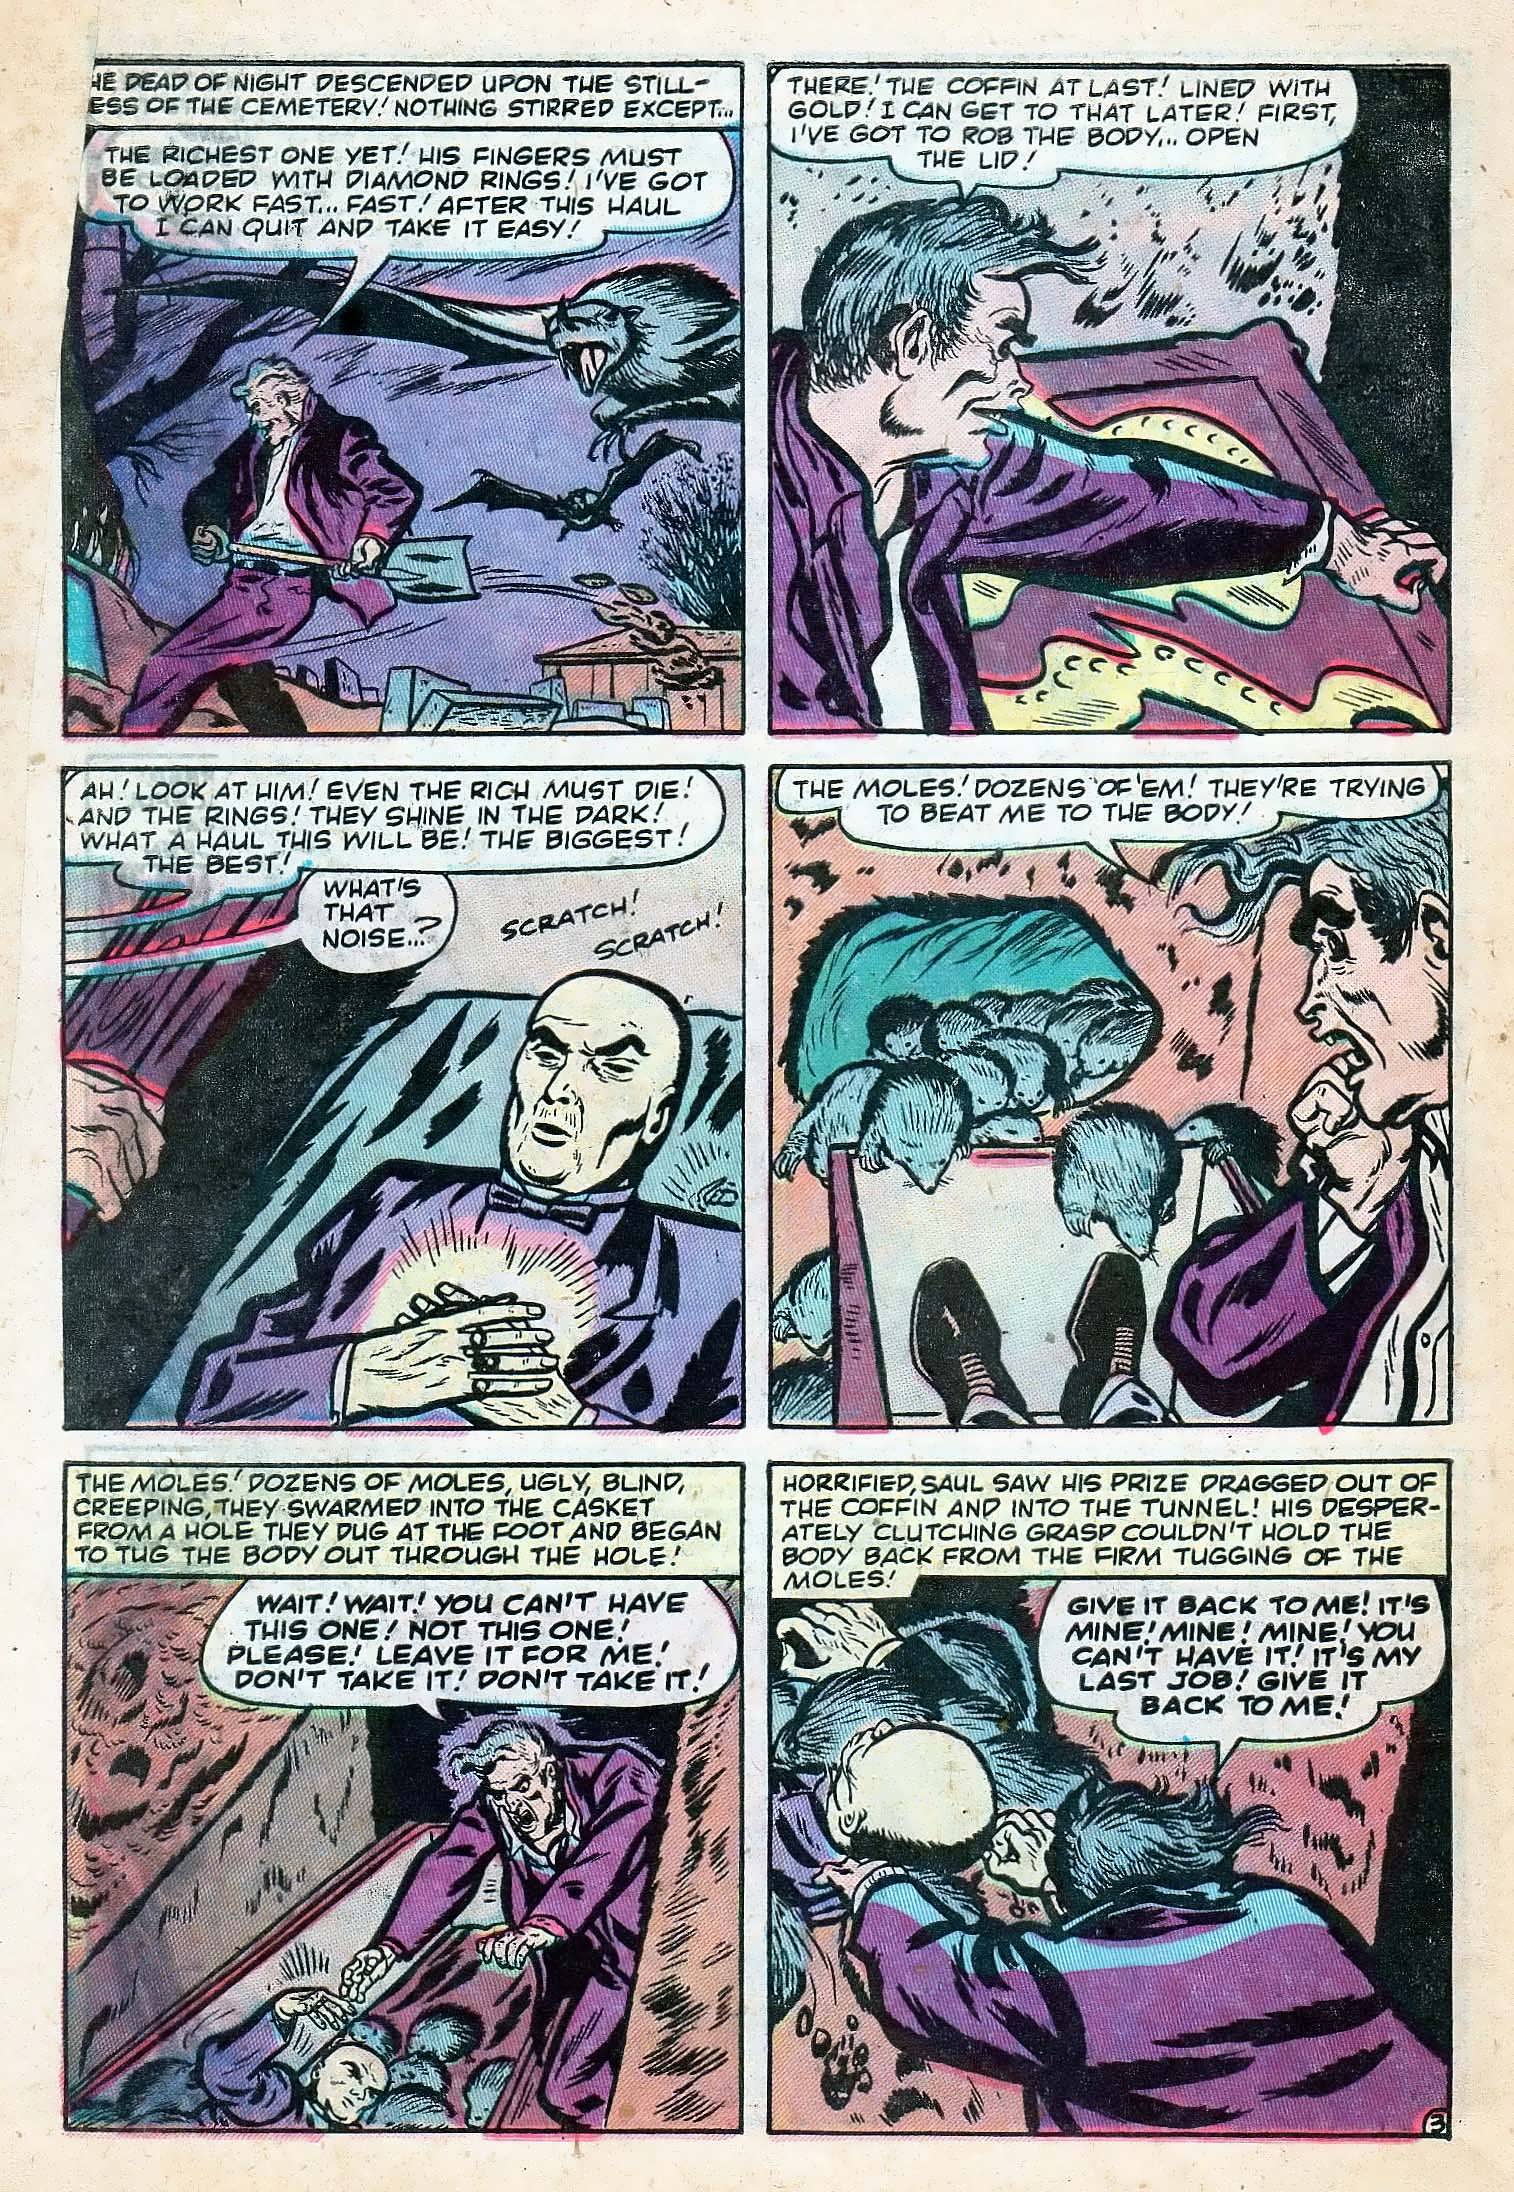 Marvel Tales (1949) 106 Page 29